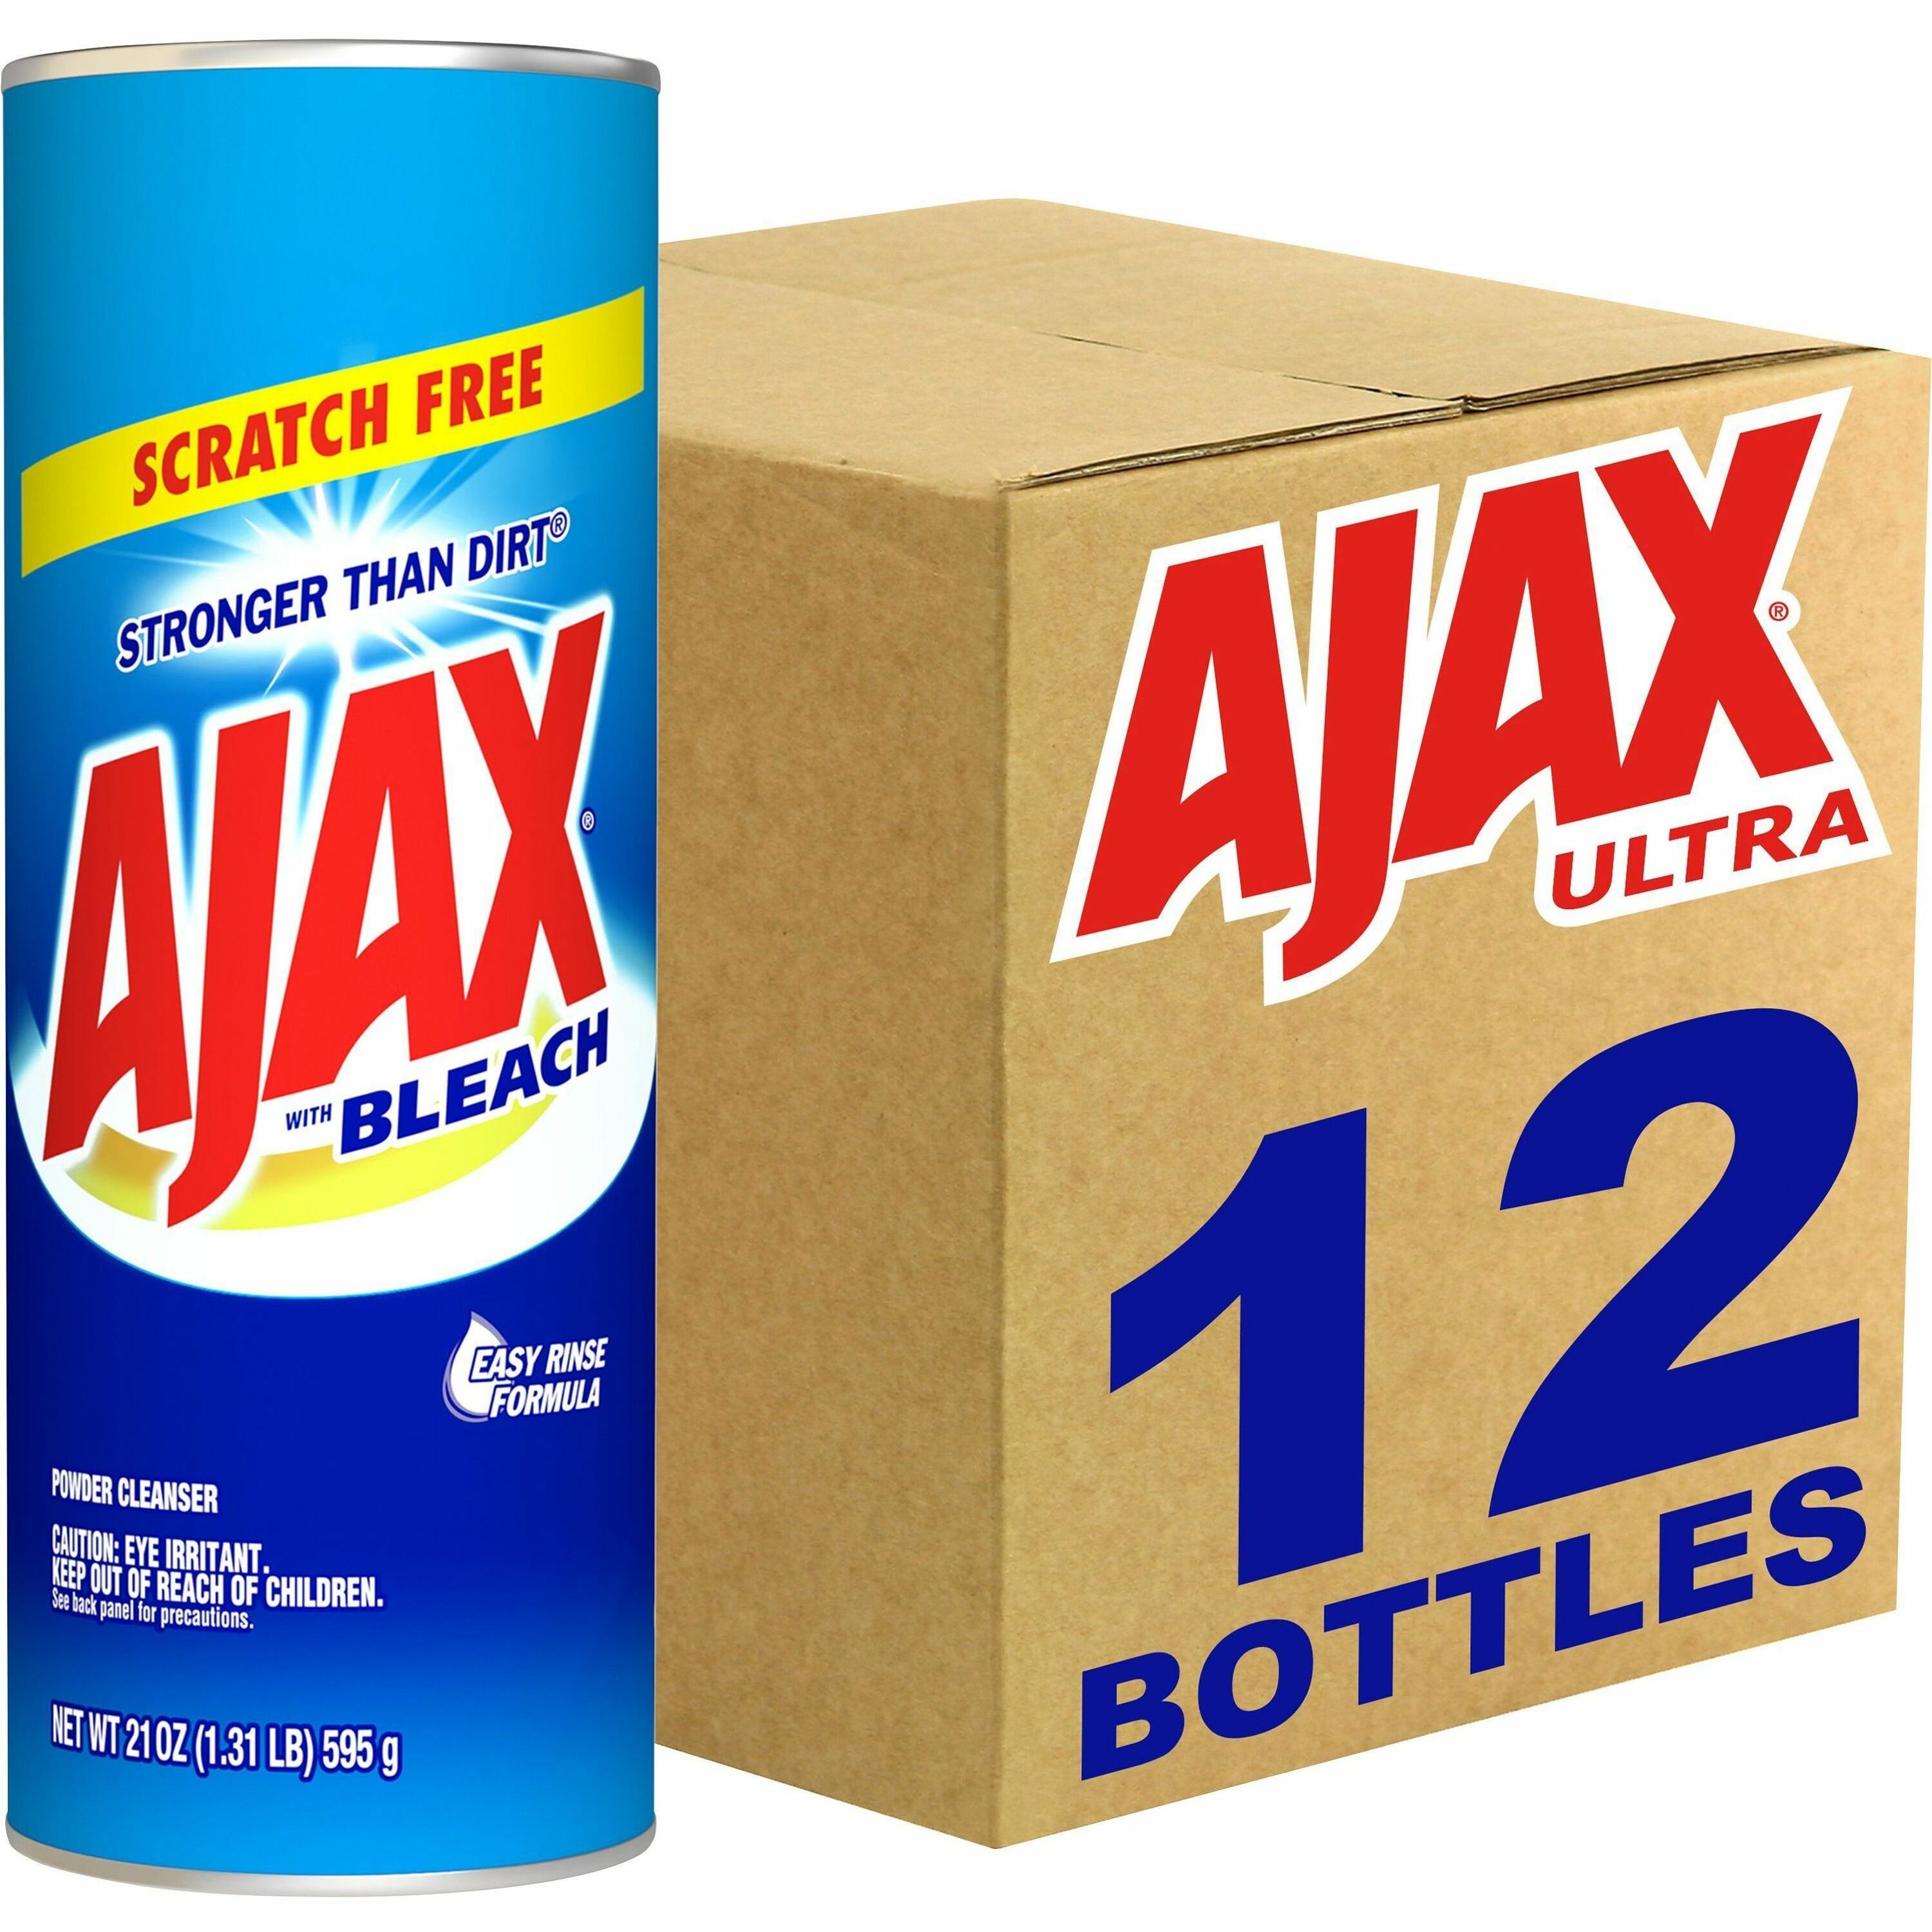 AJAX Powder Cleanser With Bleach - 21 oz (1.31 lb) - 12 / Carton - Non-scratching, Phosphate-free - White - 1